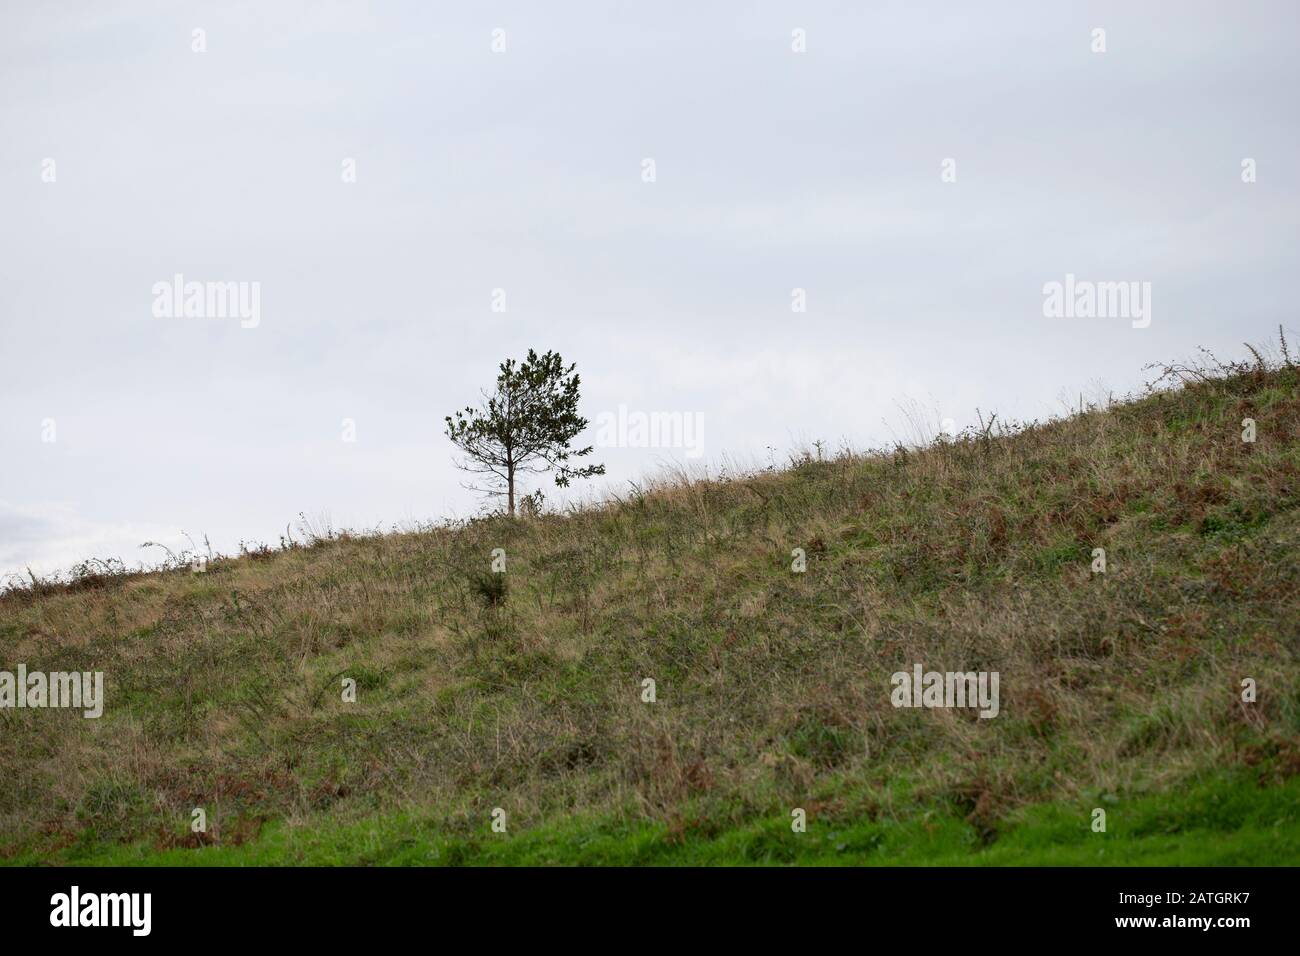 Green hill with single tree Stock Photo